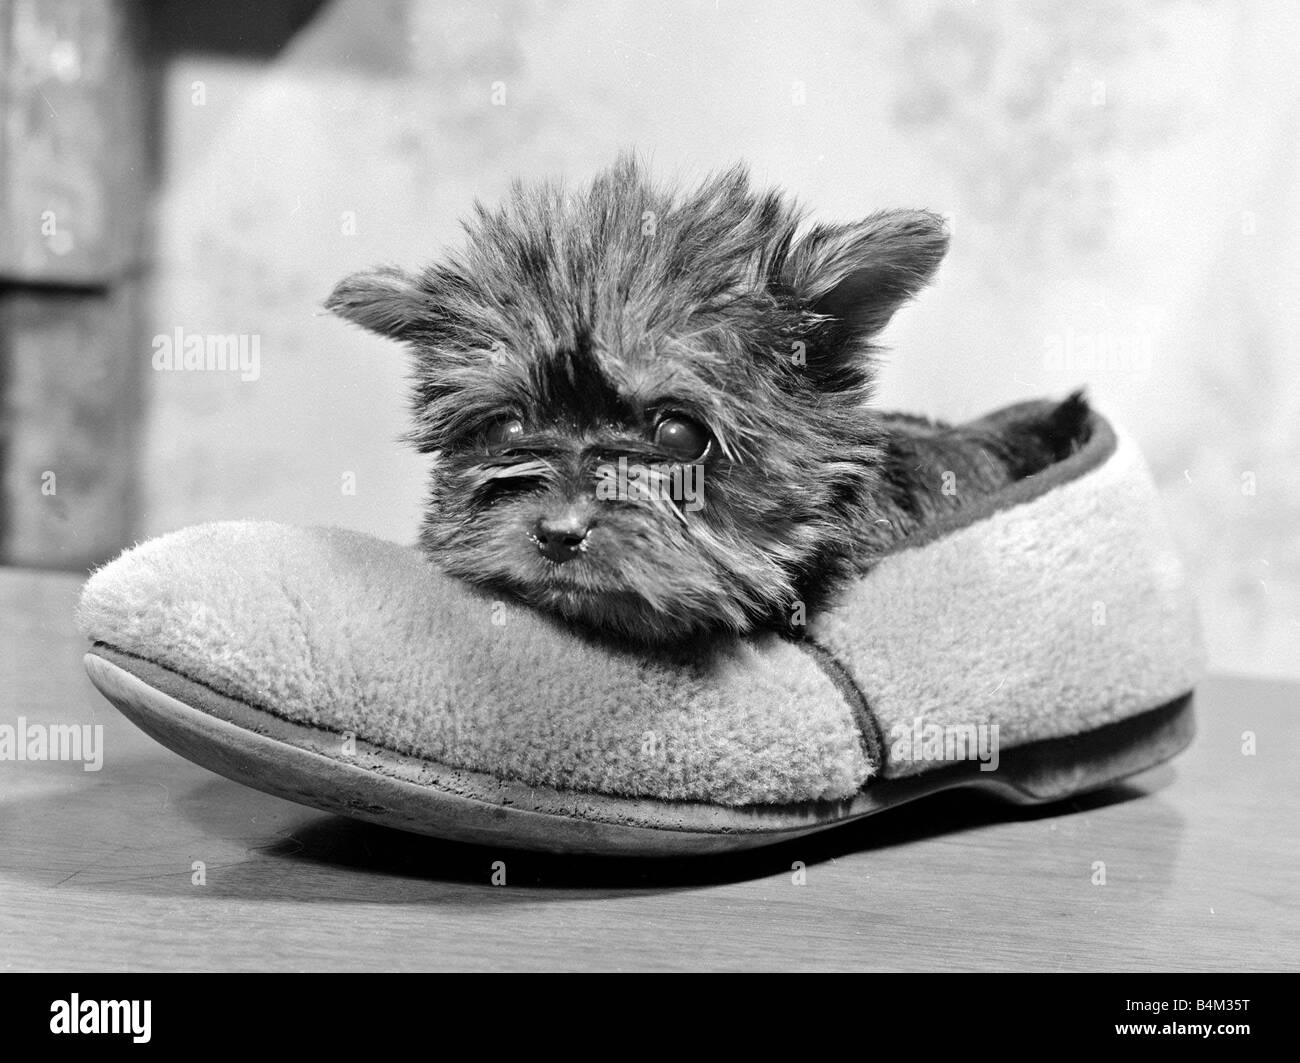 Four Month old Yorkshire Terrier weighs in at only 12 ozs keeping warm in an old slipper cute fluffy June 1972 Stock Photo